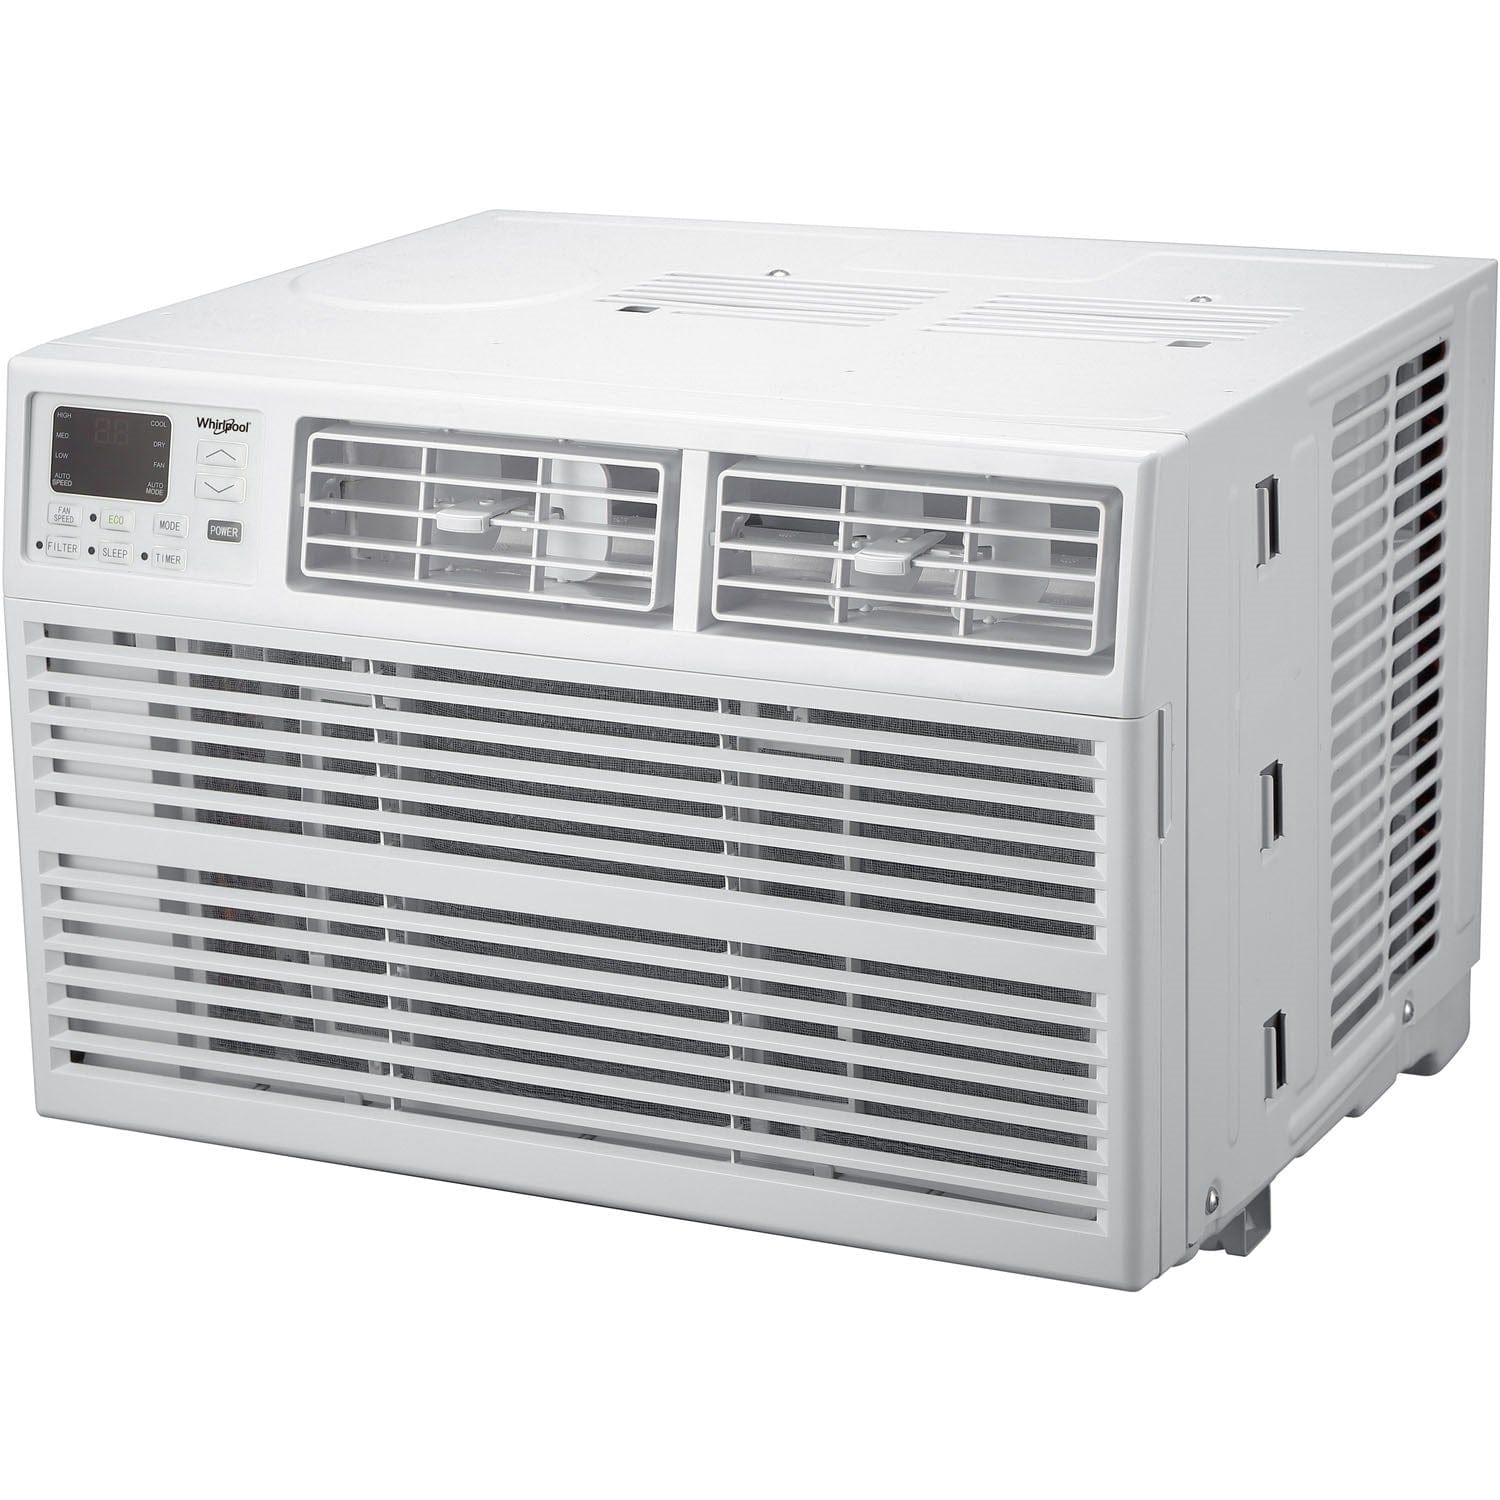 Whirlpool Air Conditioner Whirlpool - WHAW081BW 8, 000 BTU Window AC with Electronic Controls - White